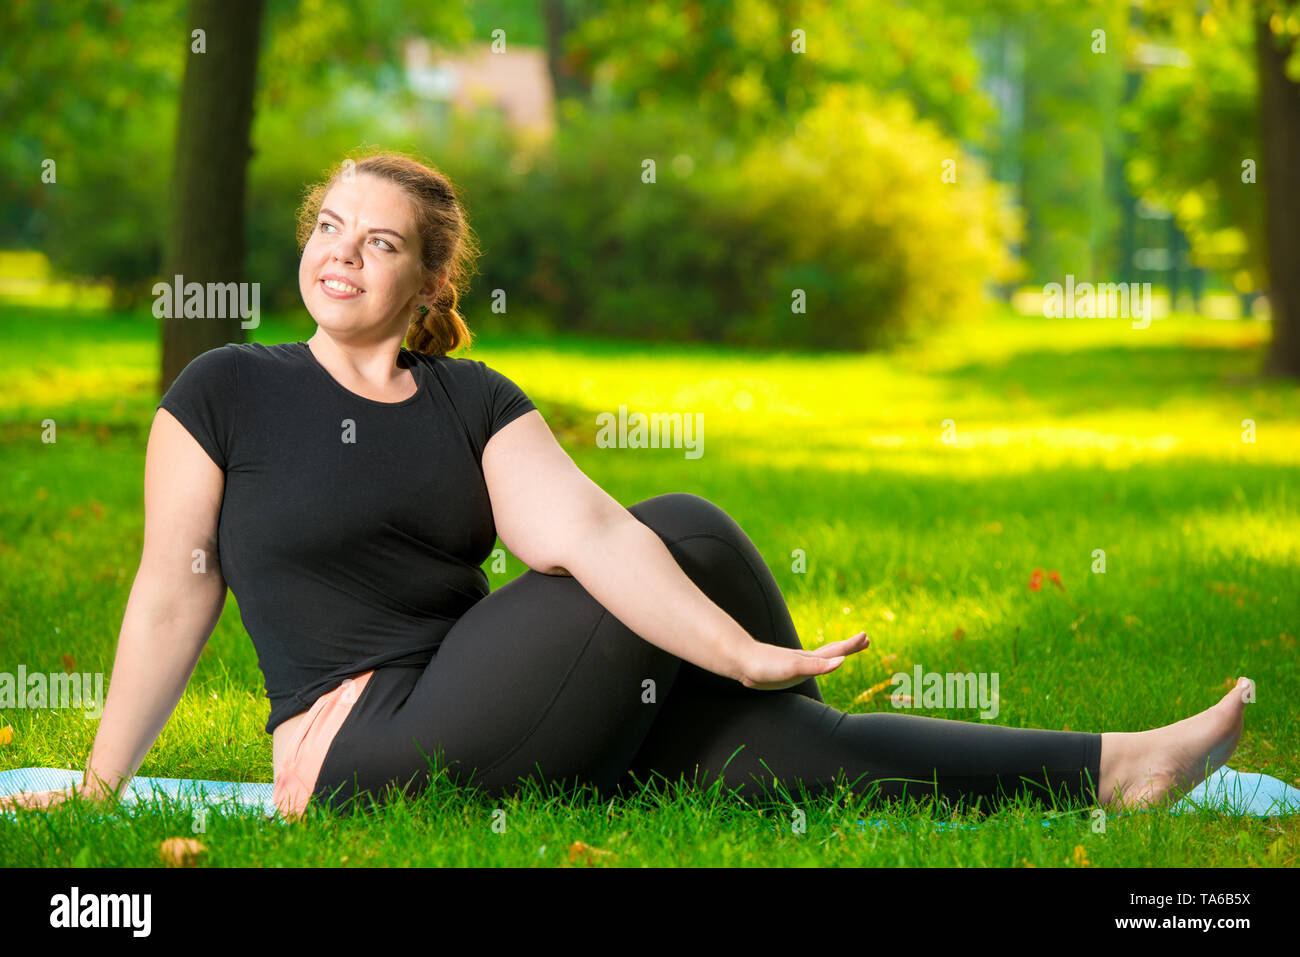 happy over sized woman in the park doing yoga early in the morning on the lawn Stock Photo